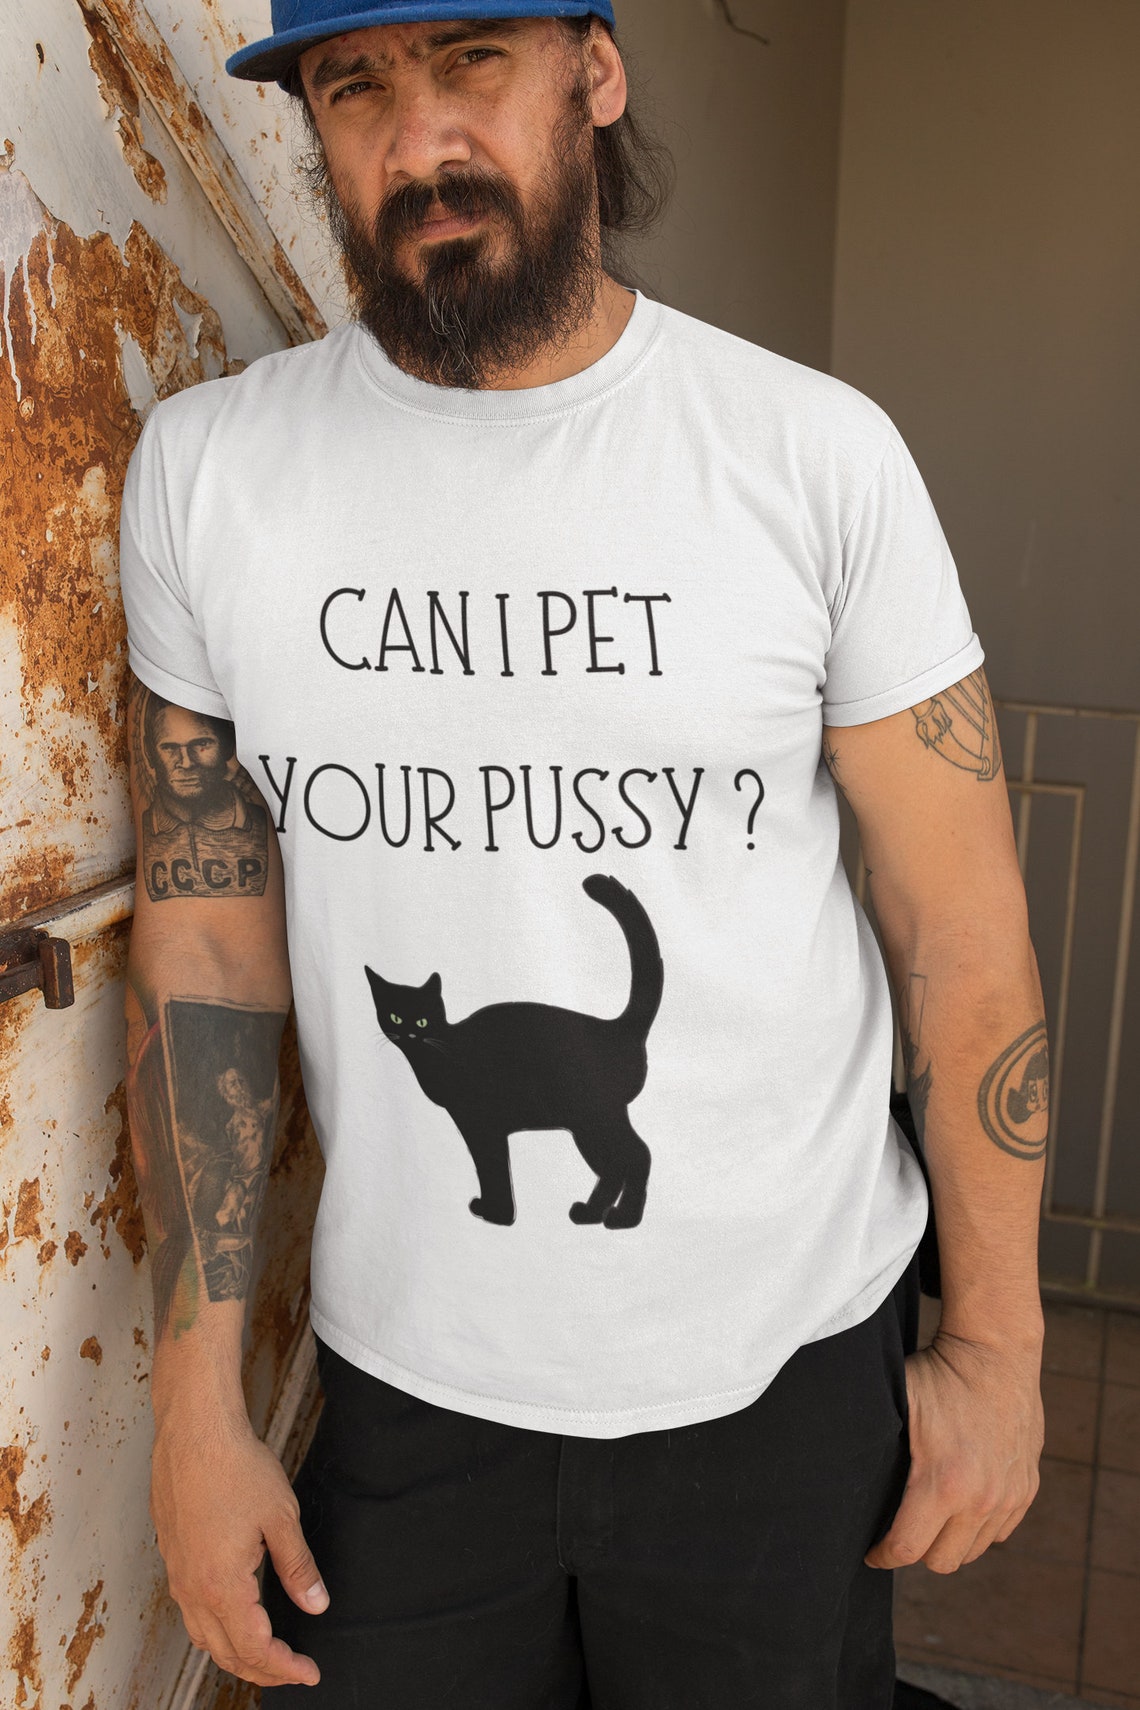 Amusing T Shirt Can I Pet Your Pussy Great T For A Etsy